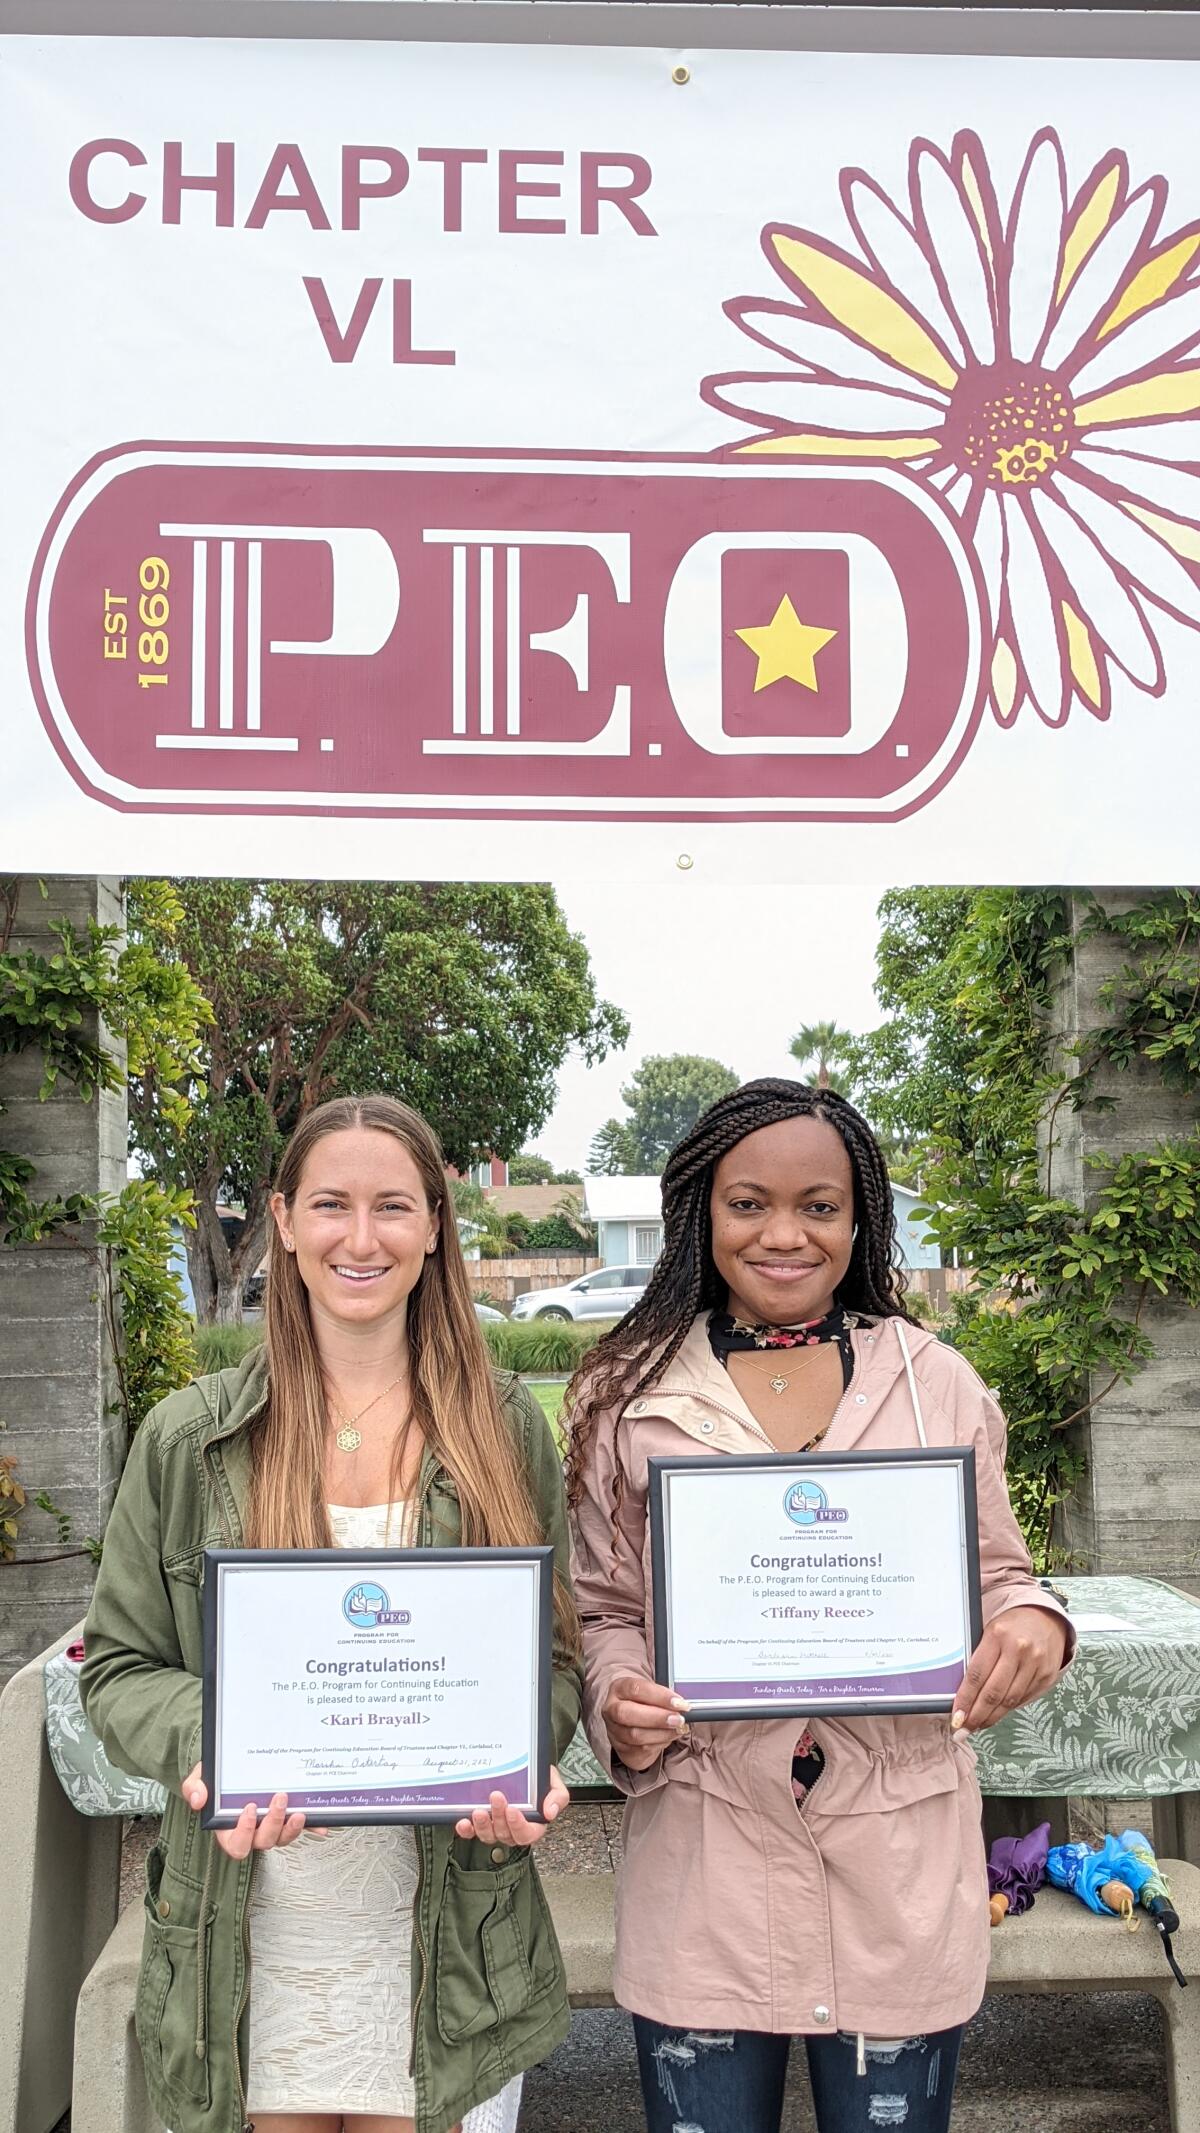 MiraCosta students Kari Brayall and Tiffany Reece each received $3,000 from the P.E.O.  